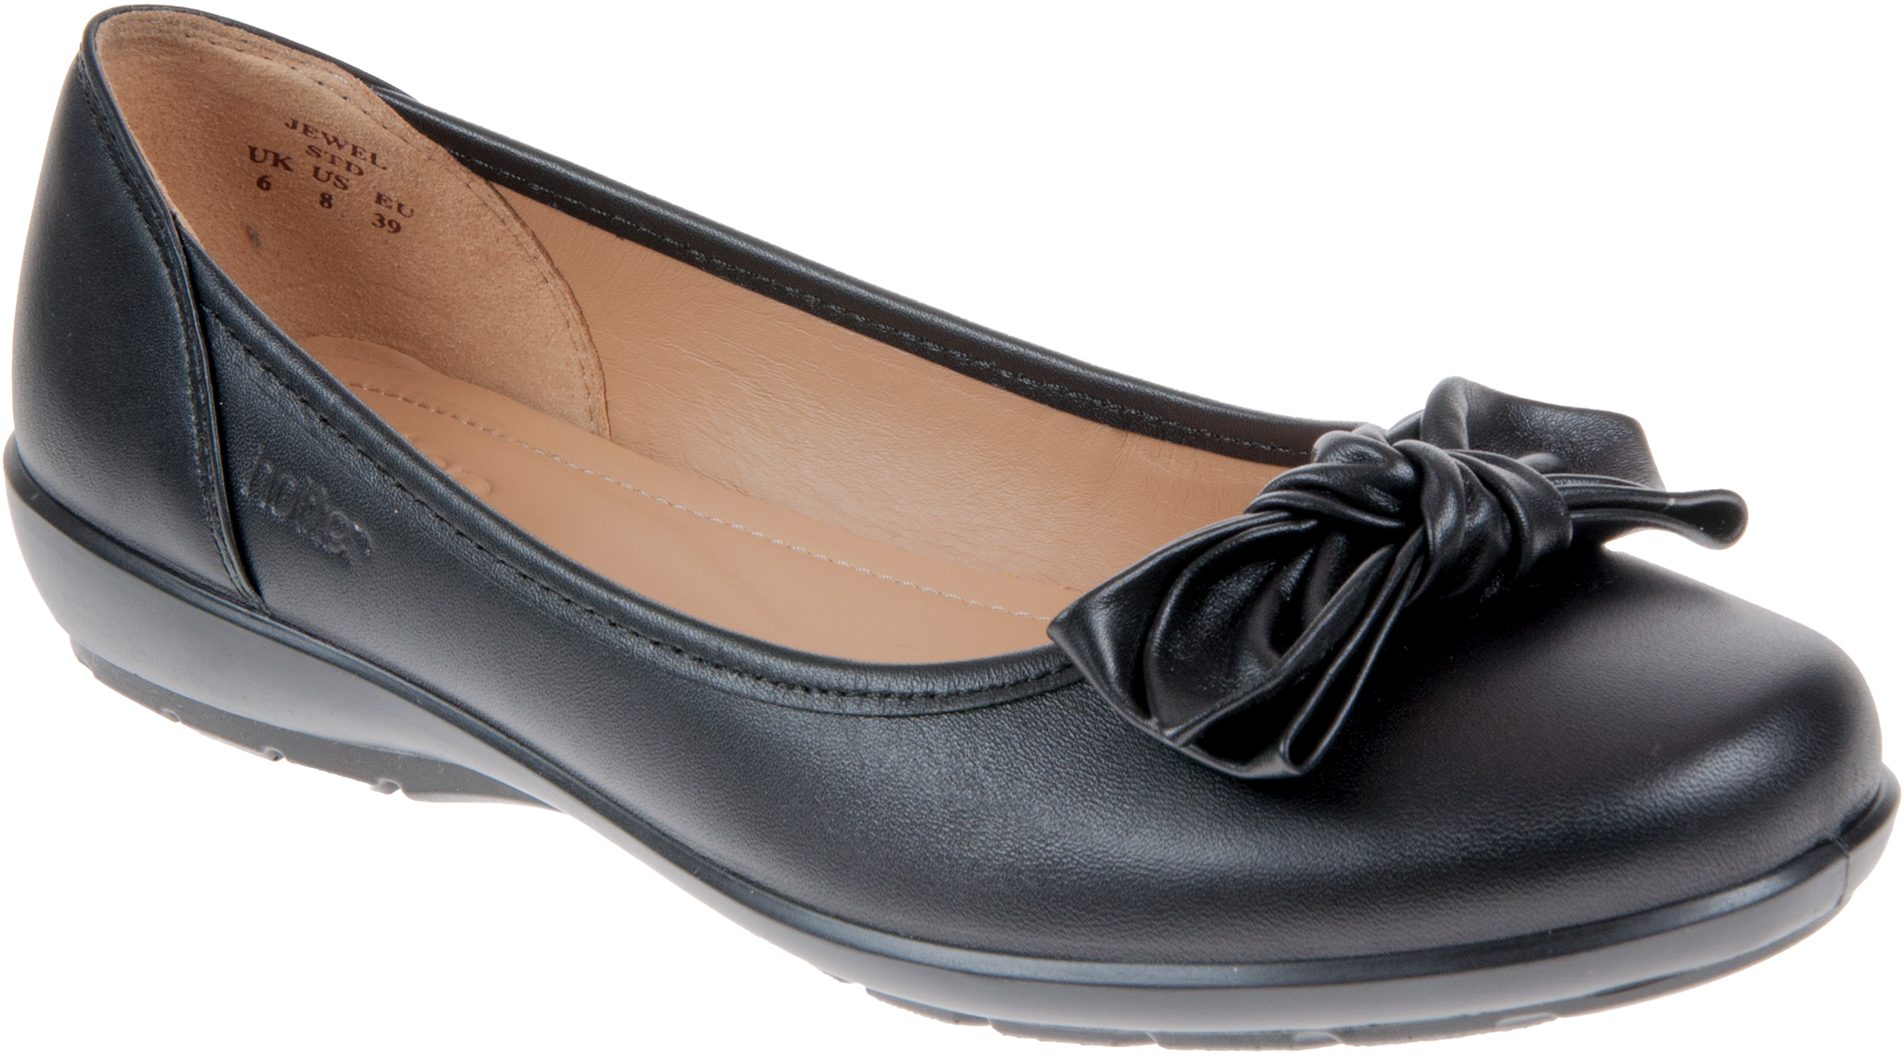 Hotter Jewel Black Leather - Ballerina Shoes - Humphries Shoes